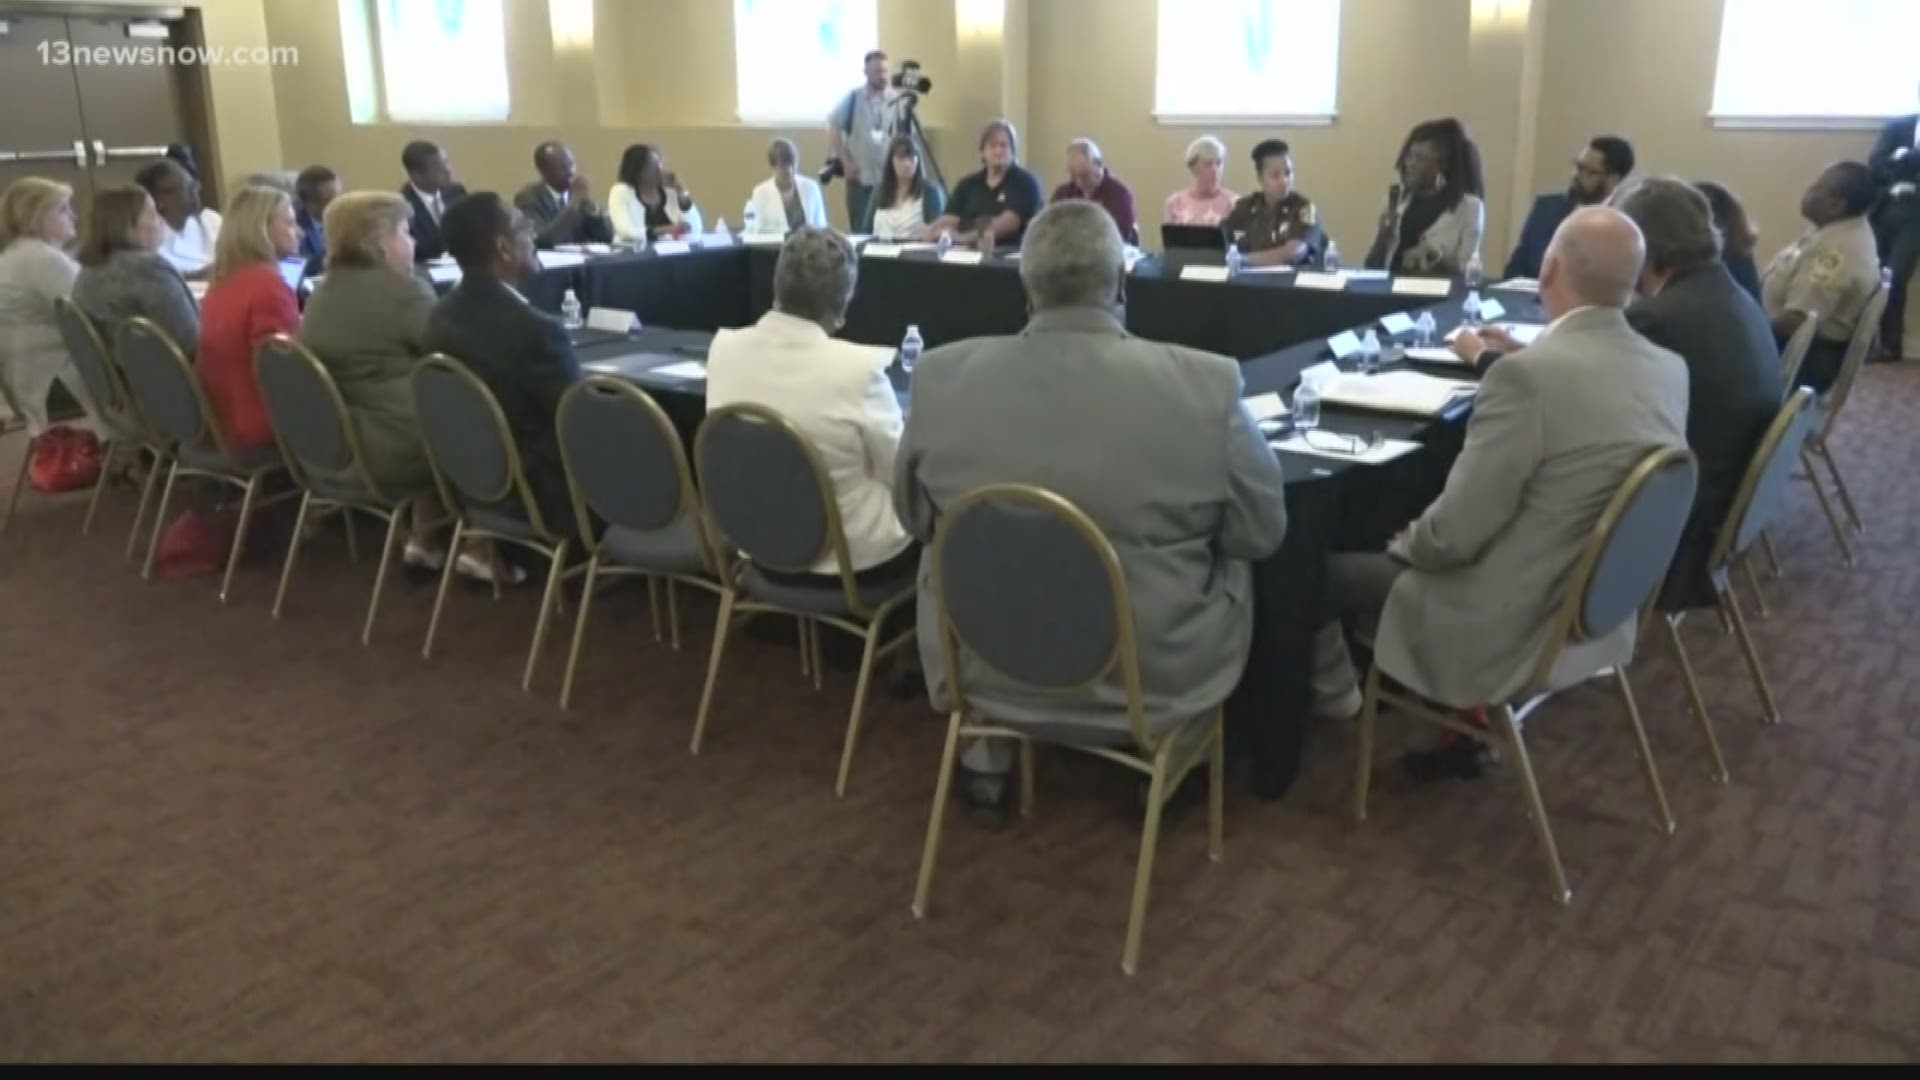 Roundtable discussion in Newport News discusses how to fix the issue of high eviction rates.